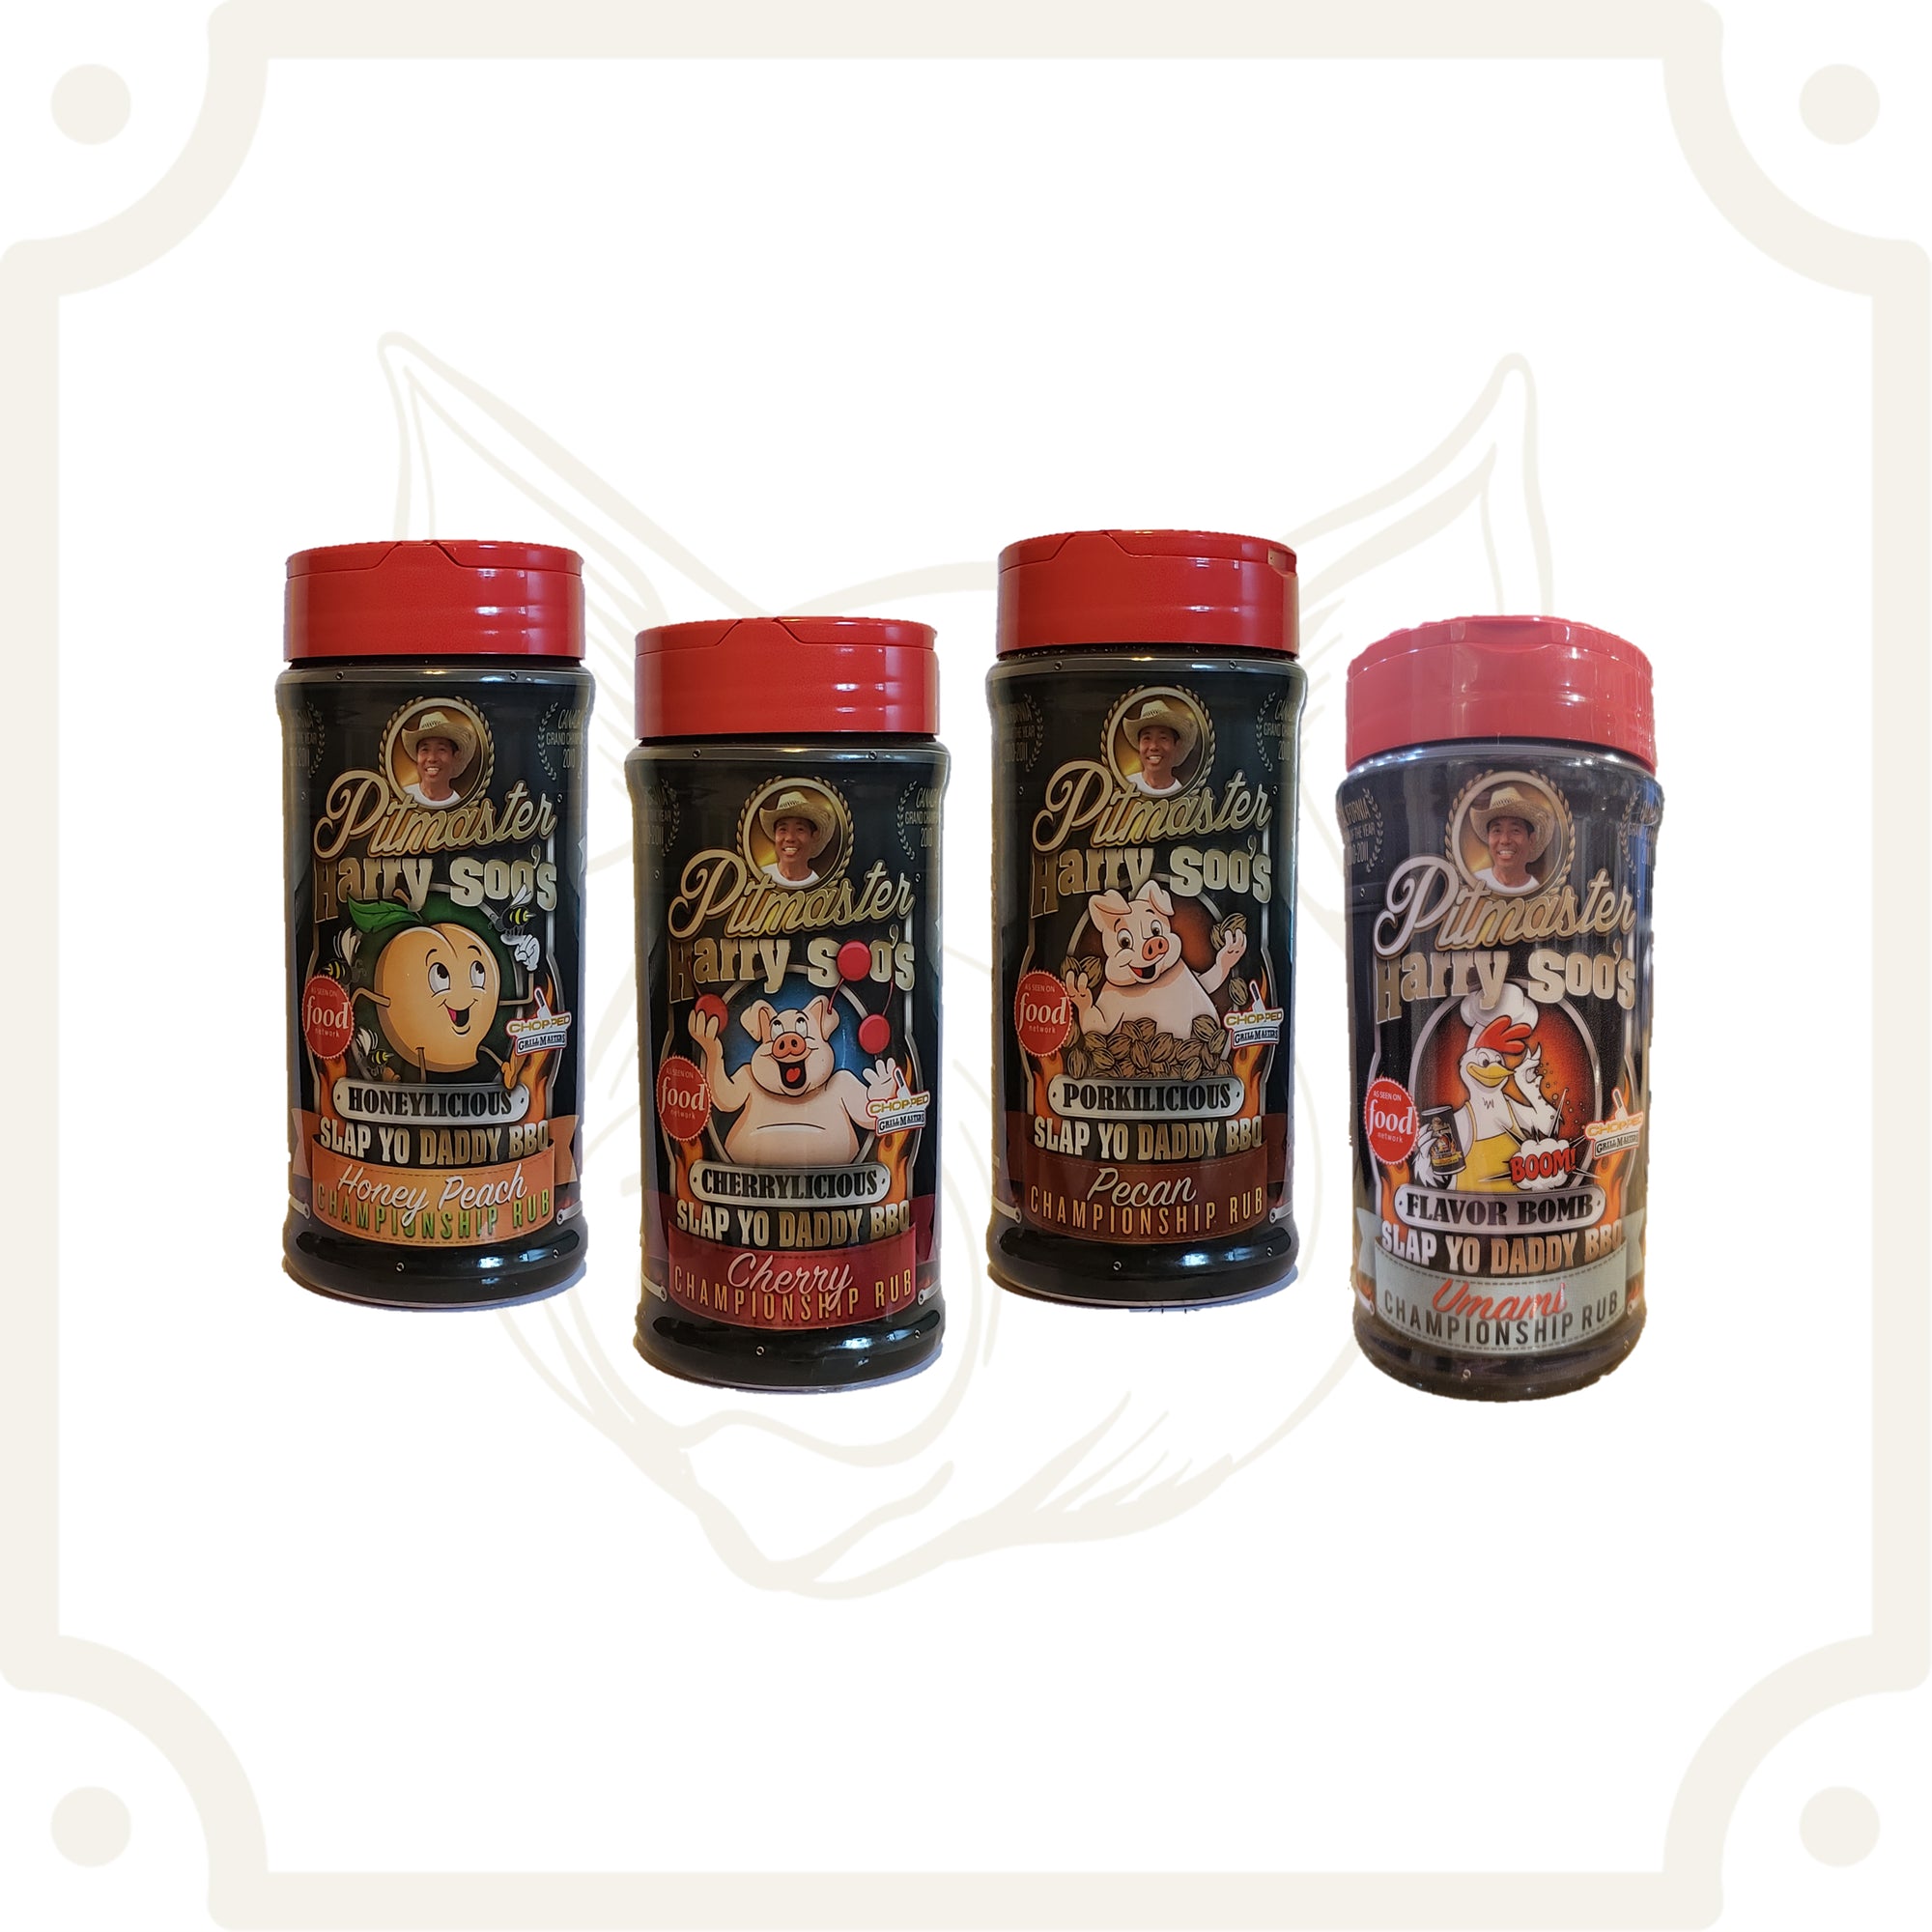 SYD Pork Butt & Ribs Competition Pack (4 Pack of 12 oz Rubs)